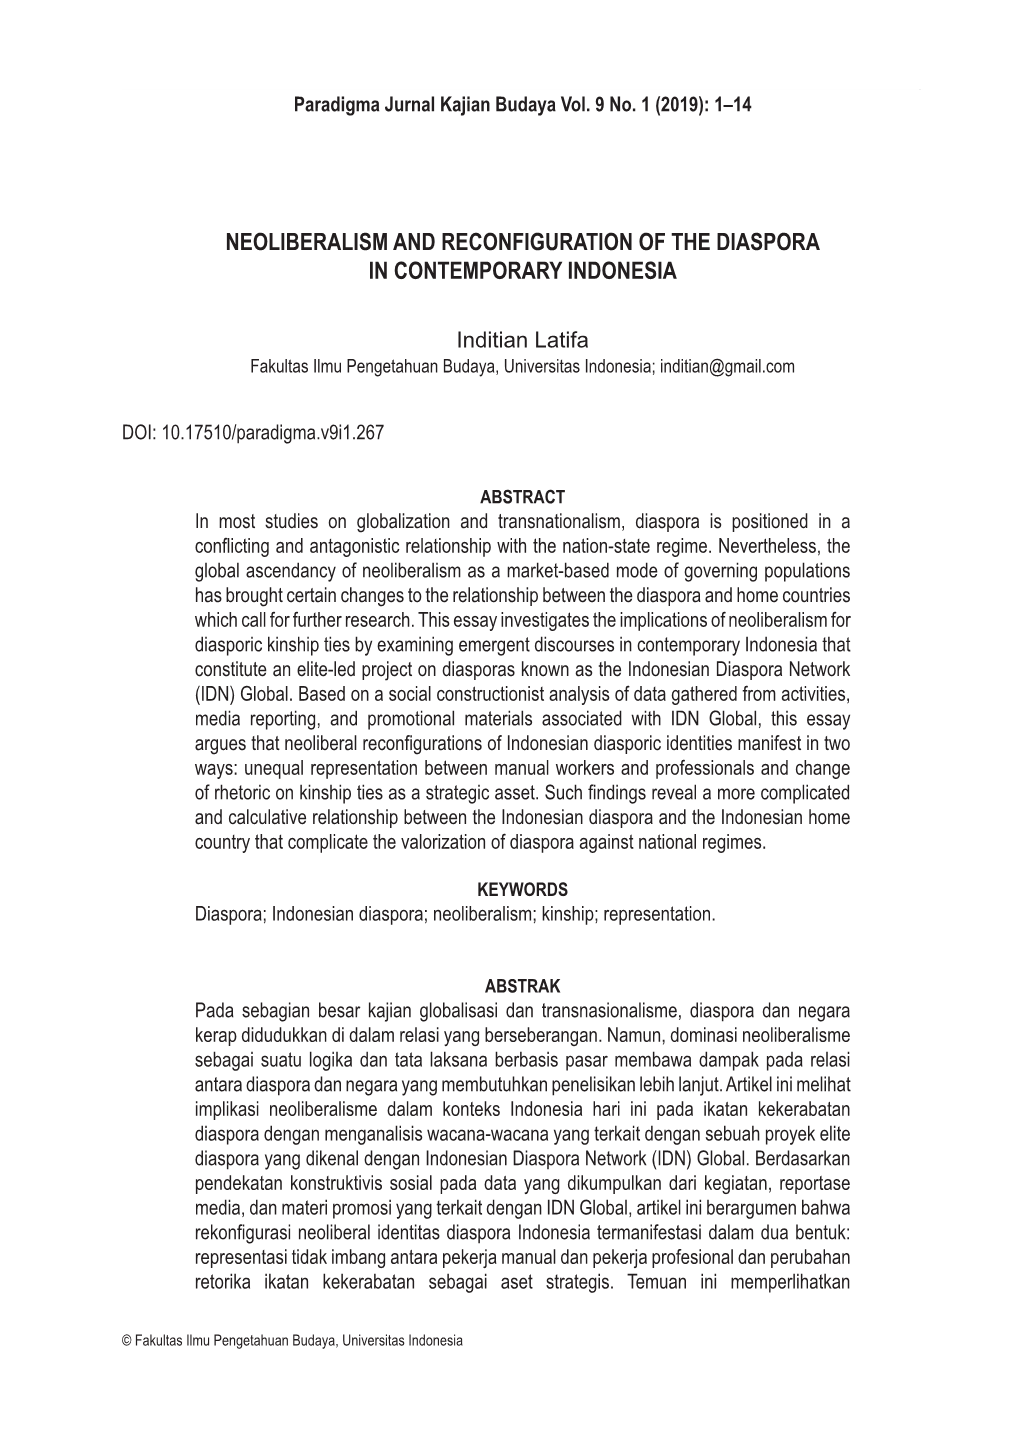 Neoliberalism and Reconfiguration of the Diaspora in Contemporary Indonesia